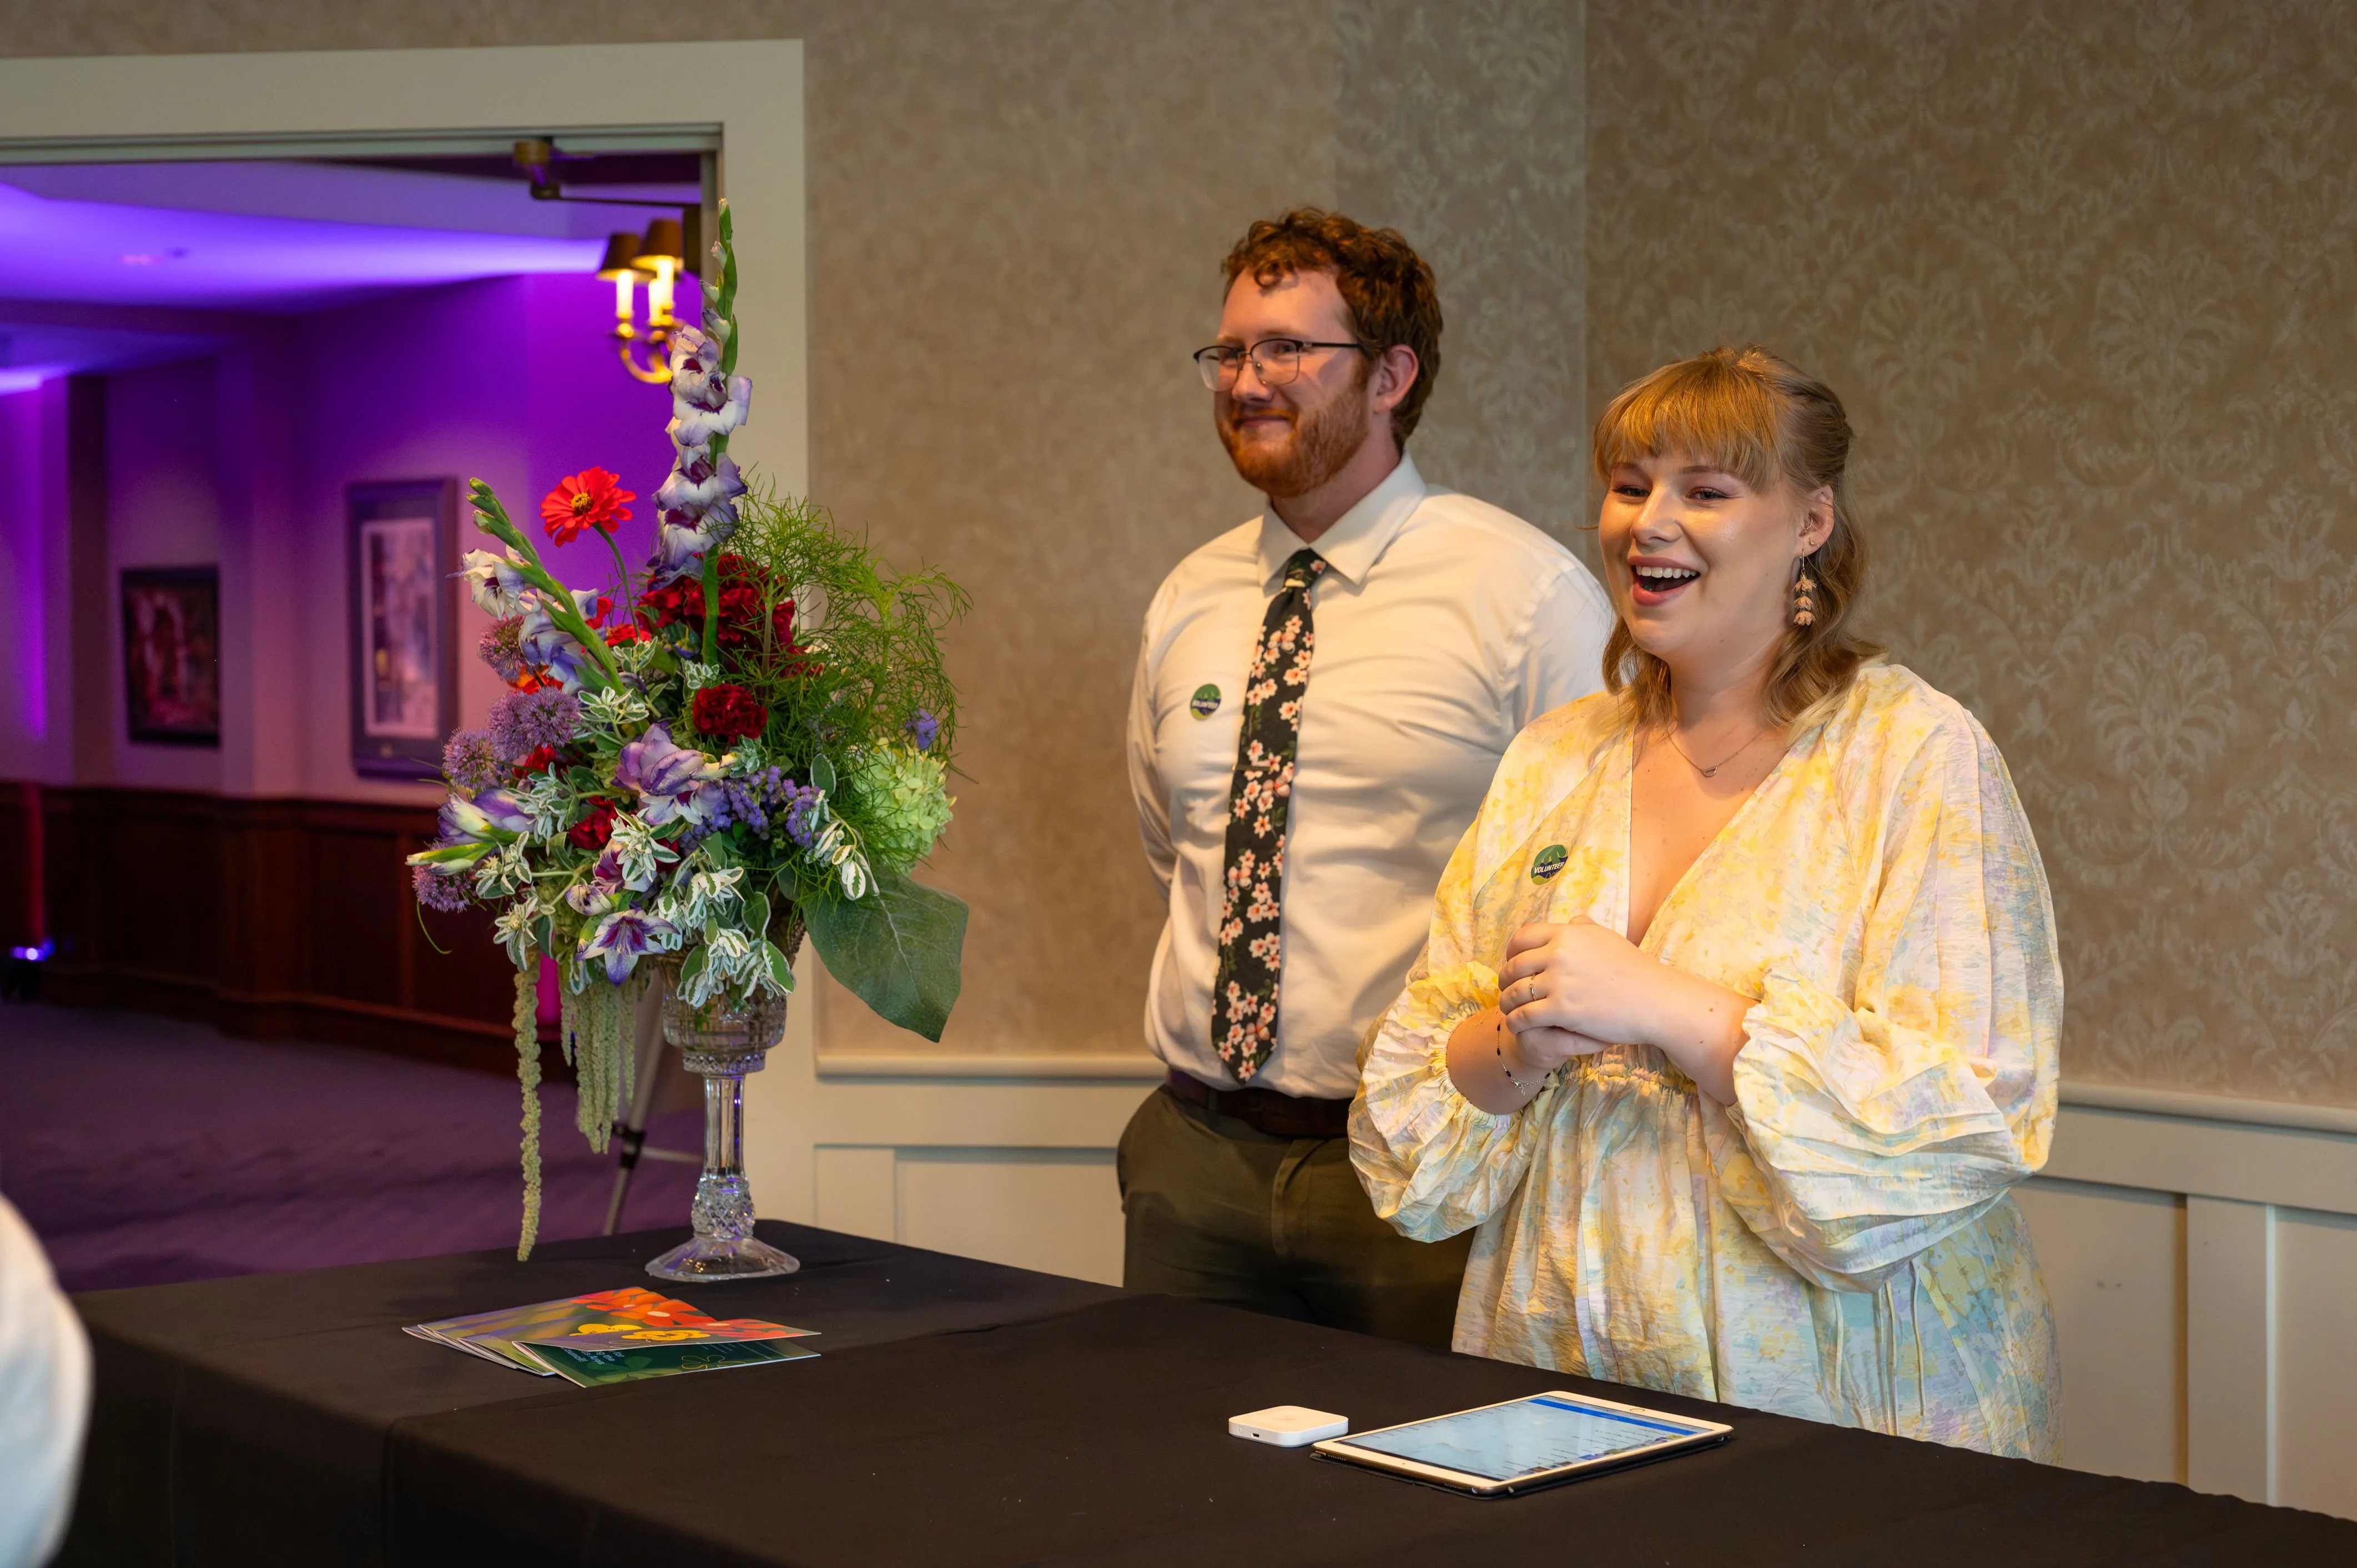 Two people standing at a table with a floral arrangement, smiling and clapping in a room with purple lighting.